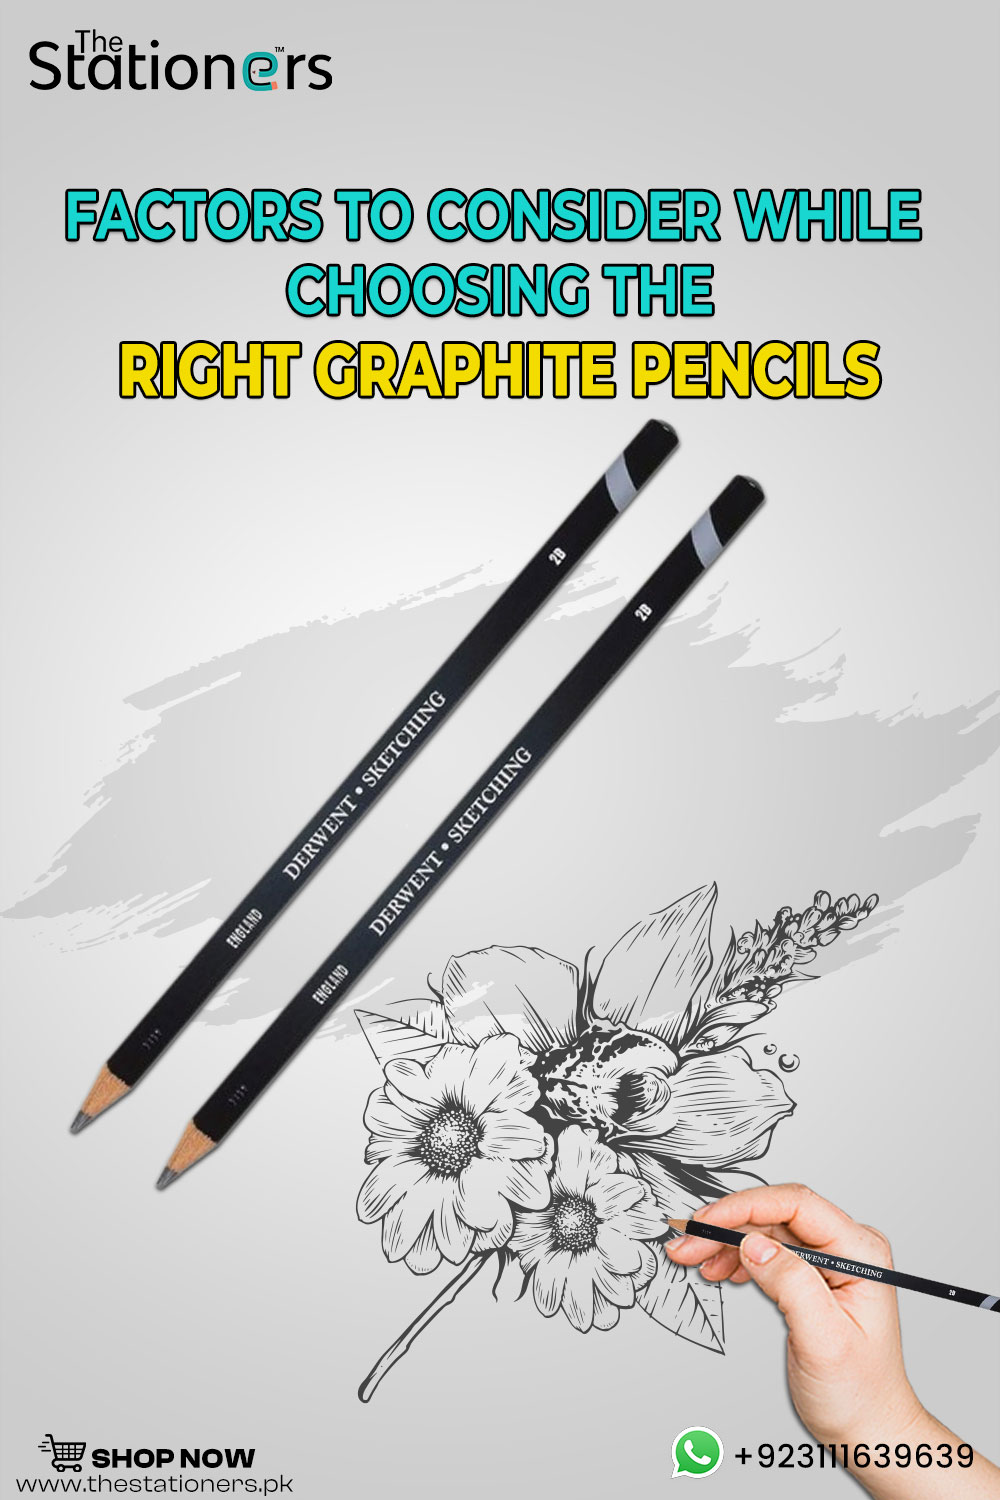 Factors to Consider While Choosing the Right Graphite Pencils